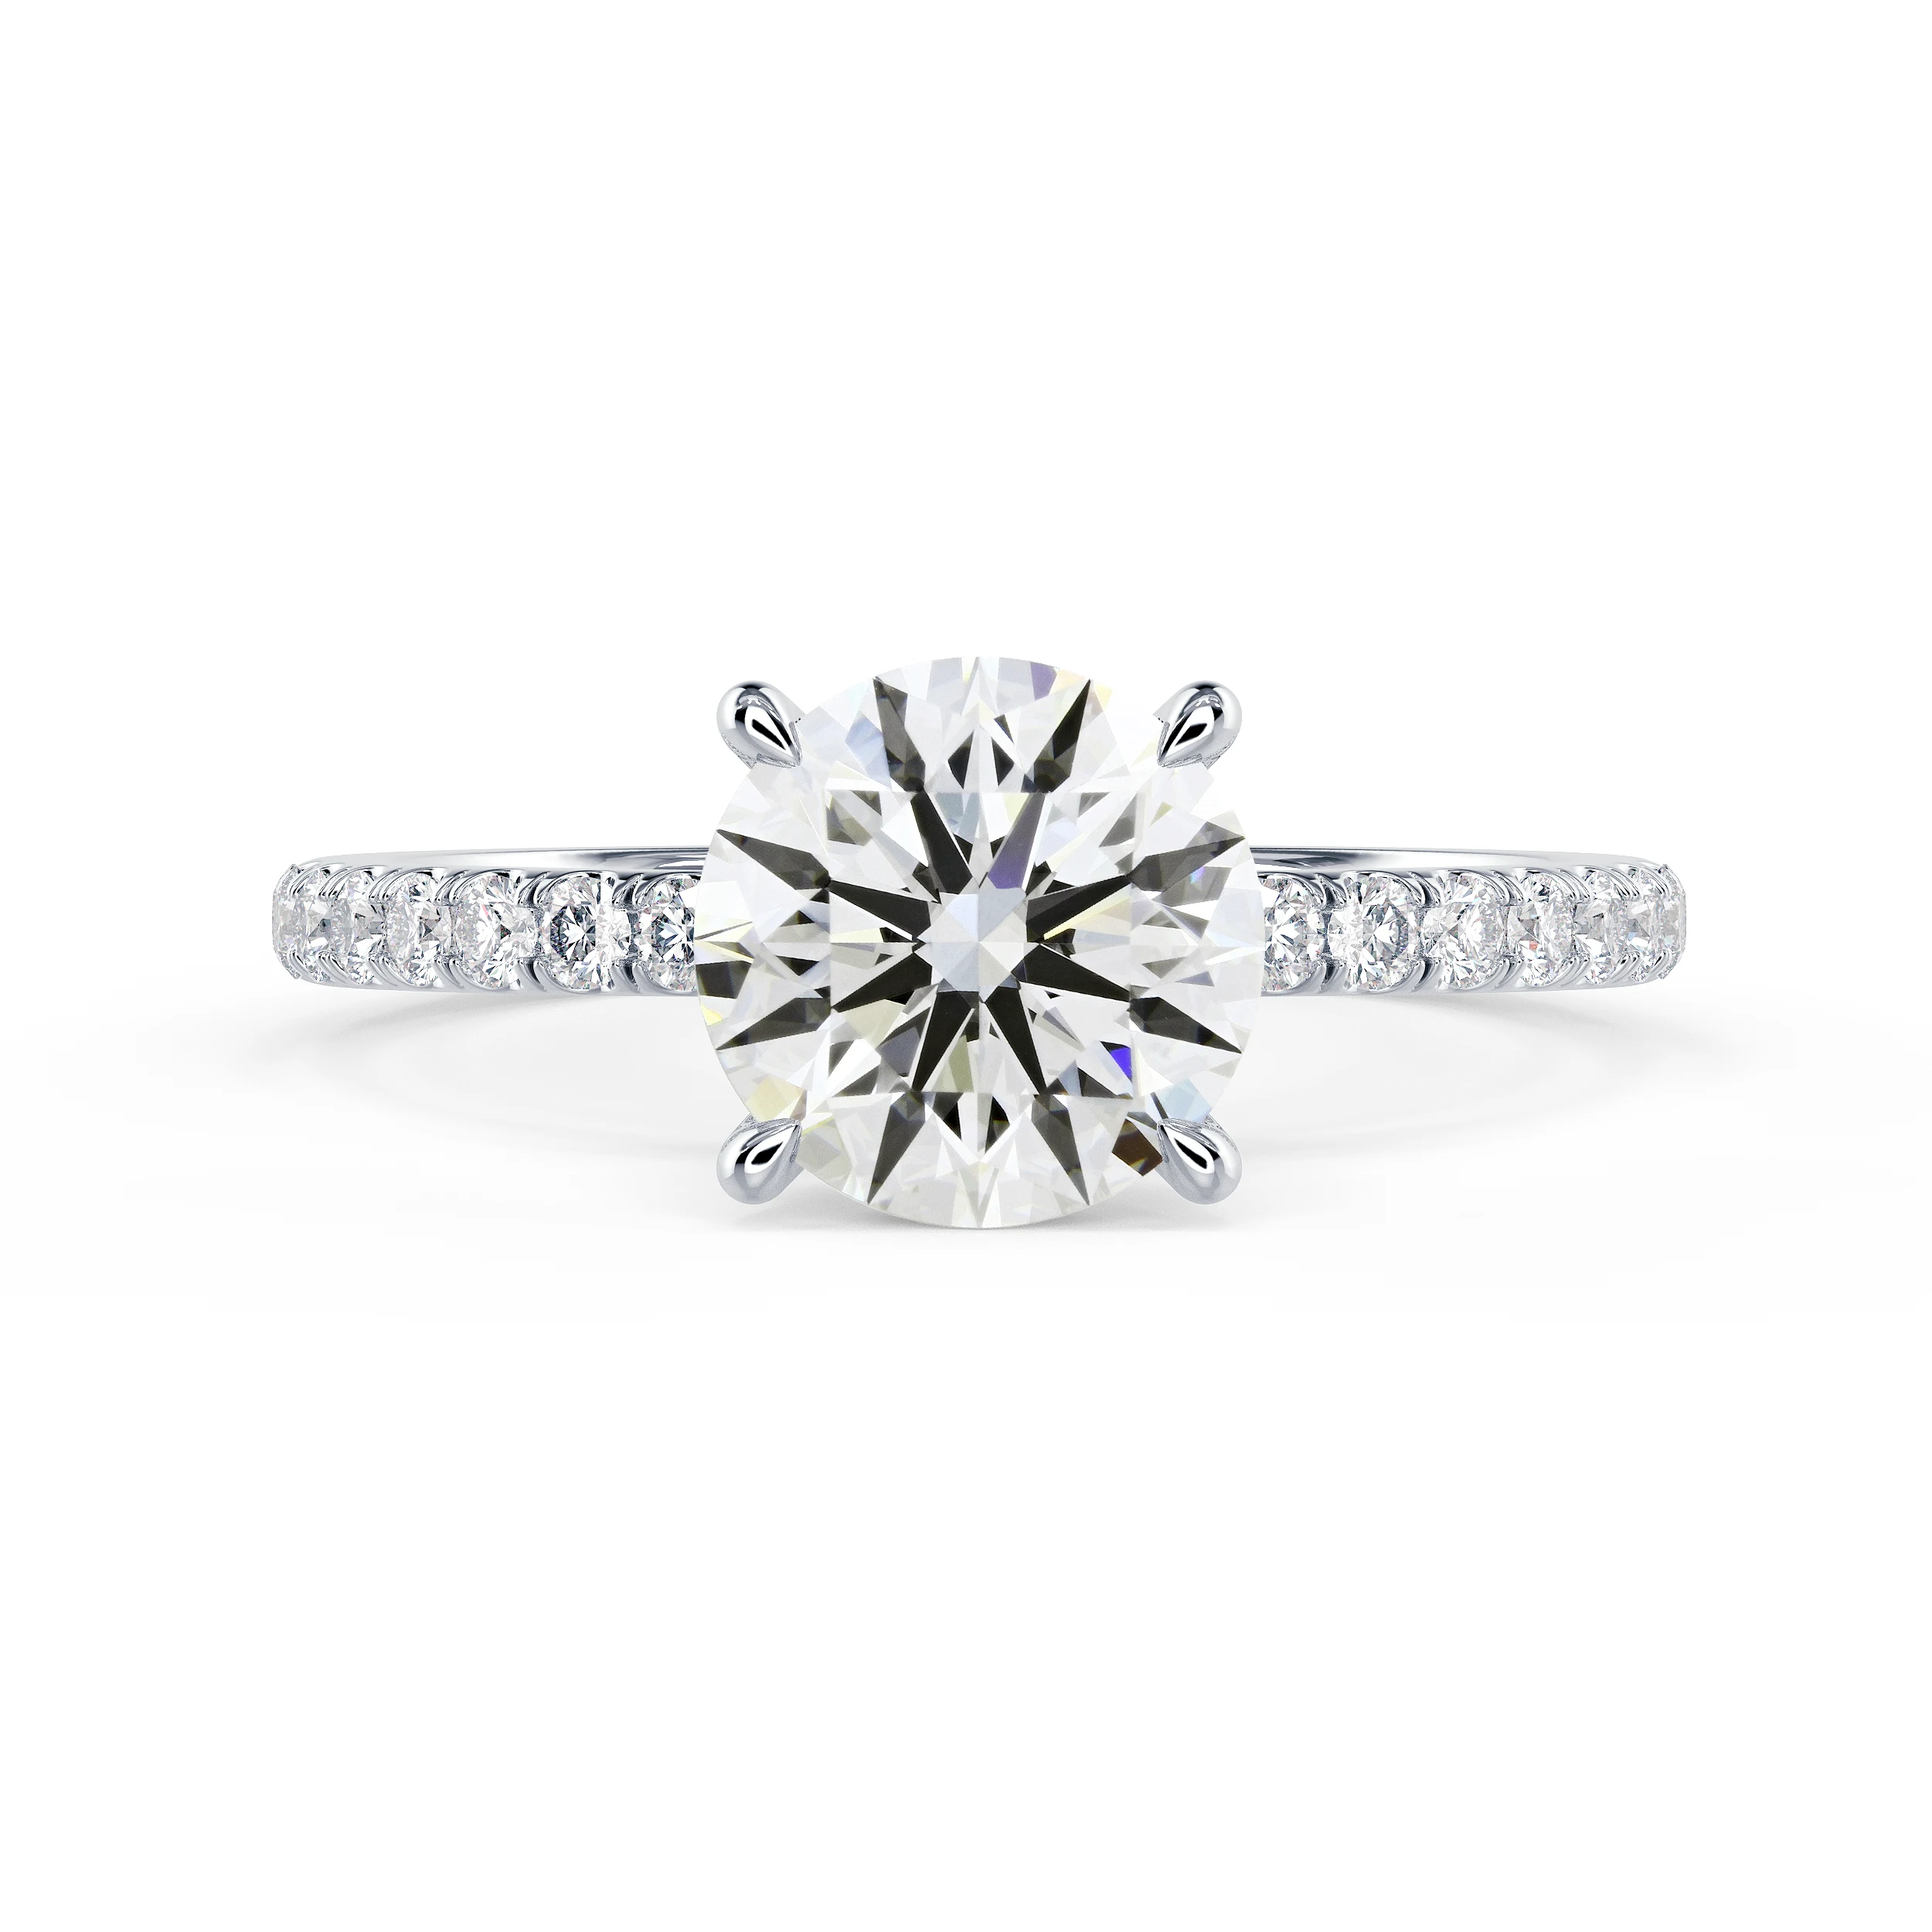 White Gold Round Petite Four Prong Pavé Diamond Engagement Ring featuring High Quality Lab Created Diamonds (Main View)